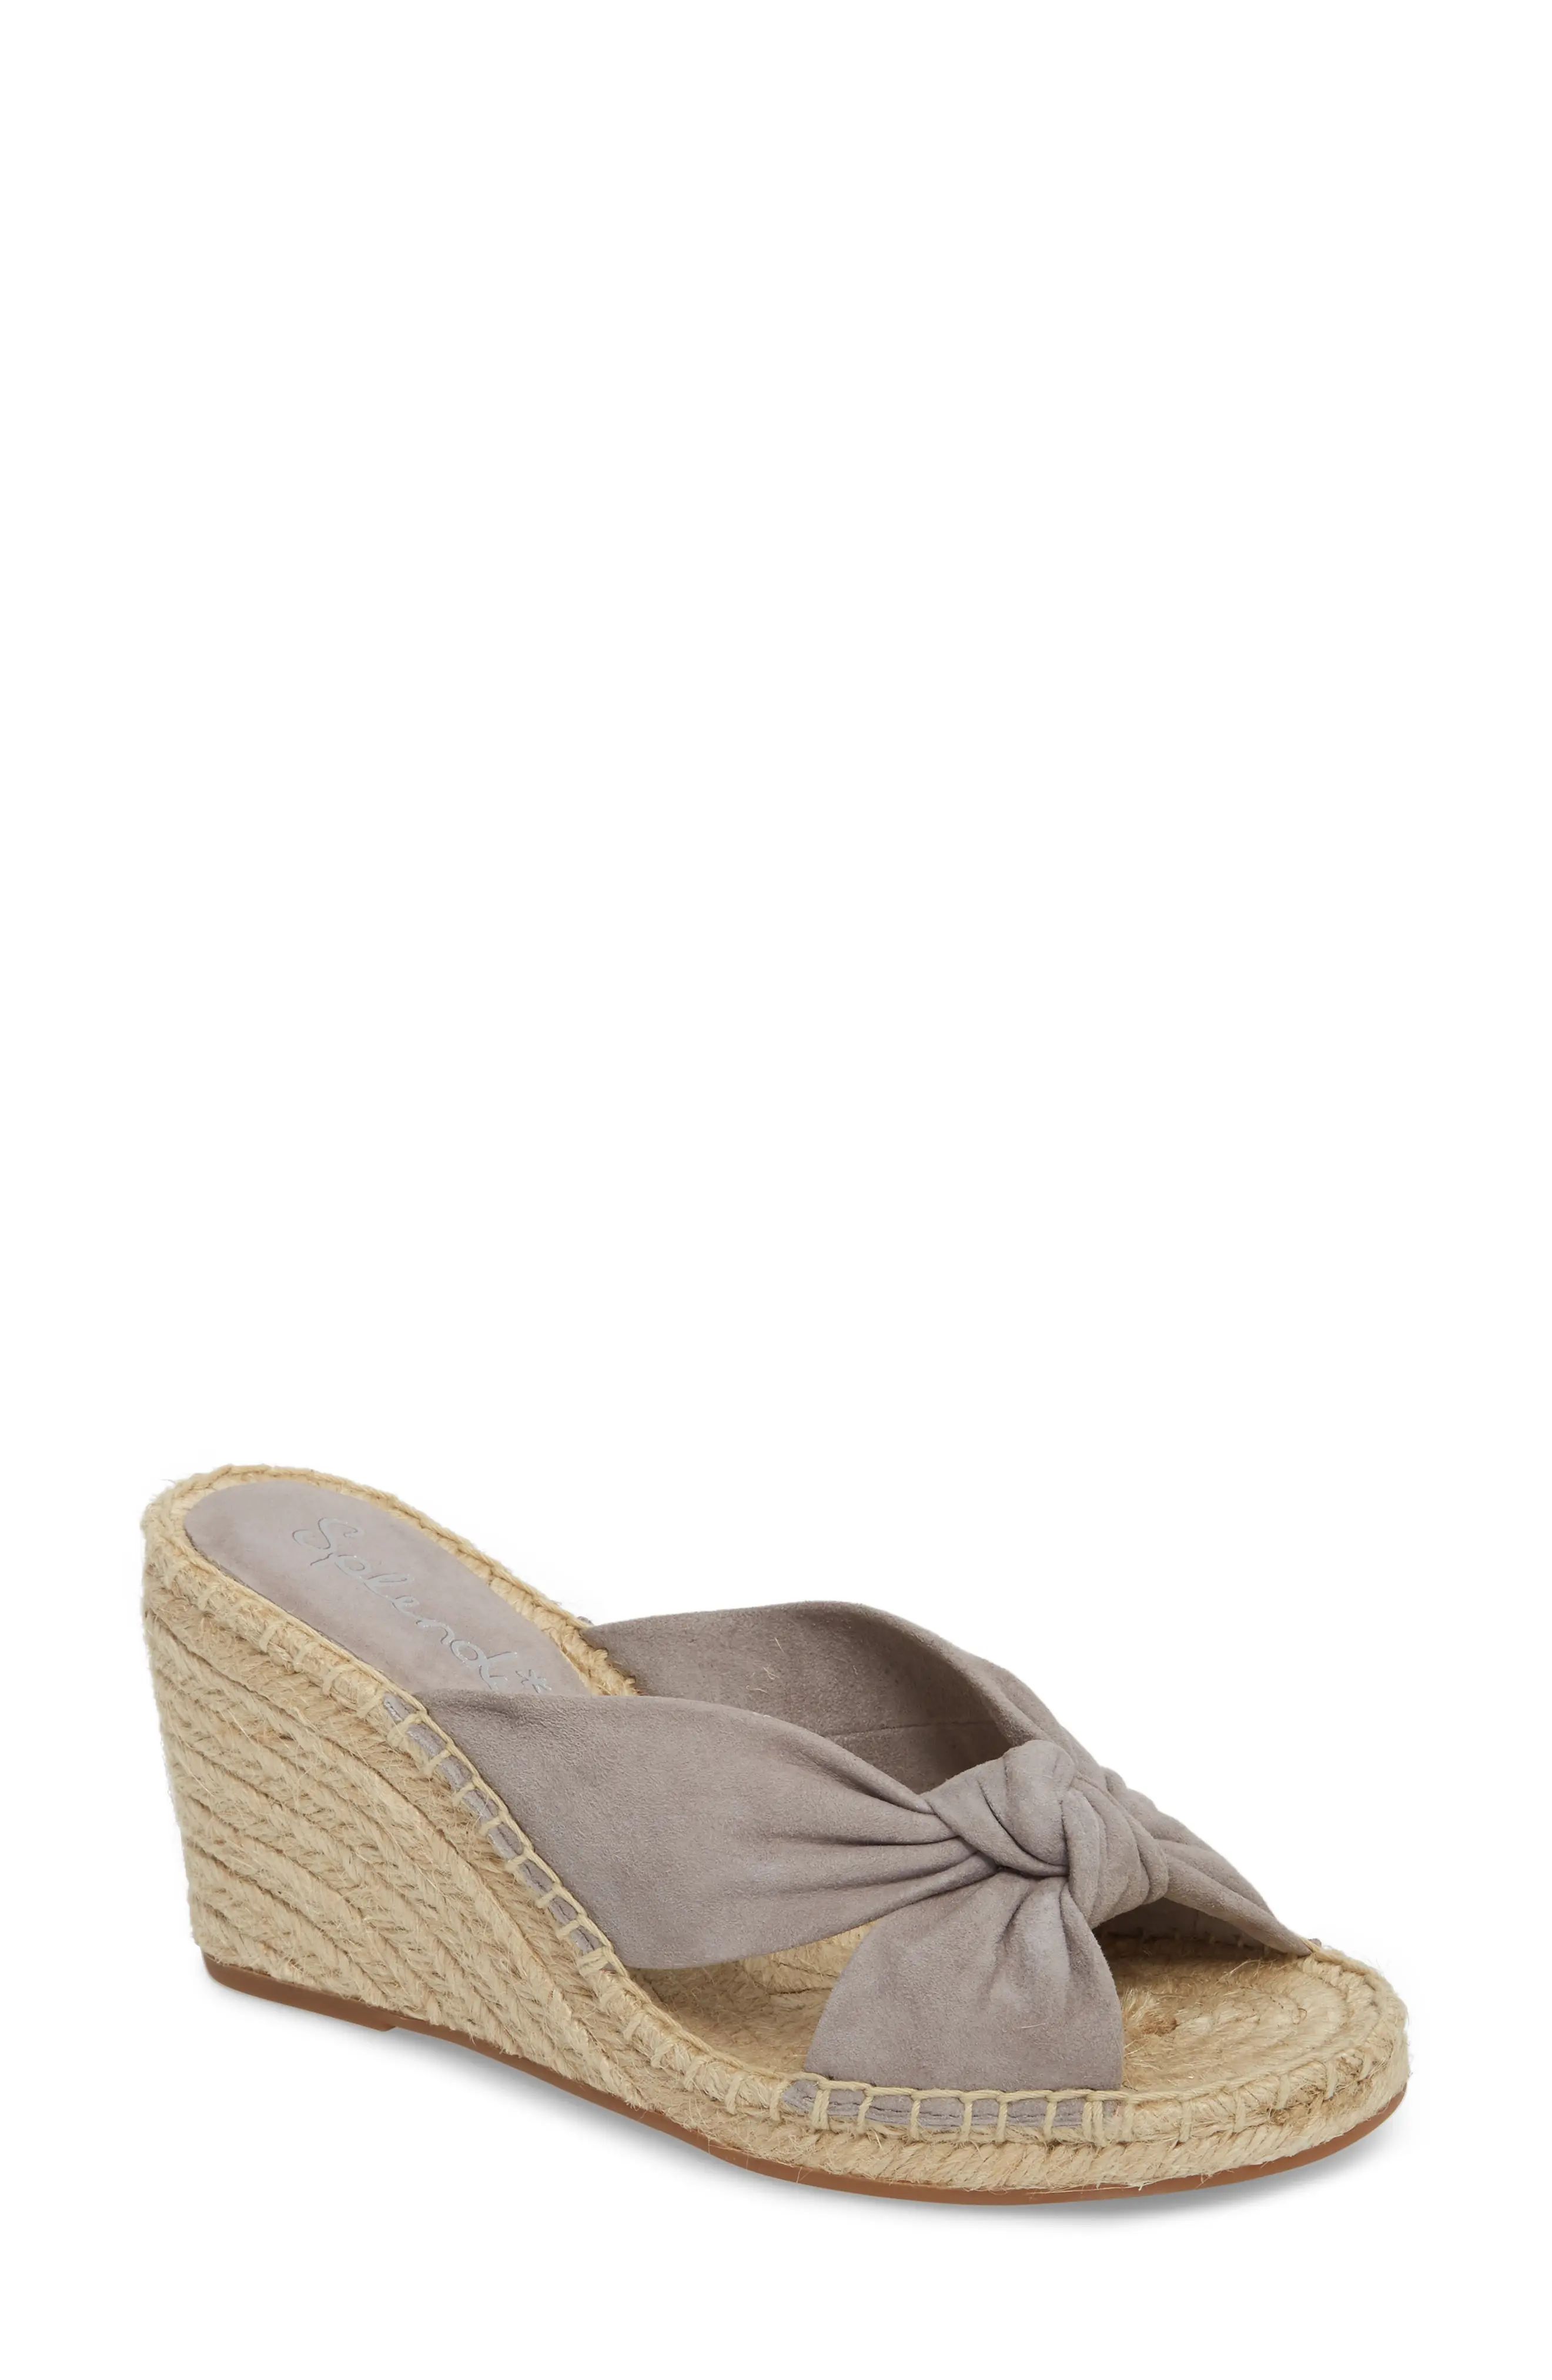 Bautista Knotted Wedge Sandal | Nordstrom